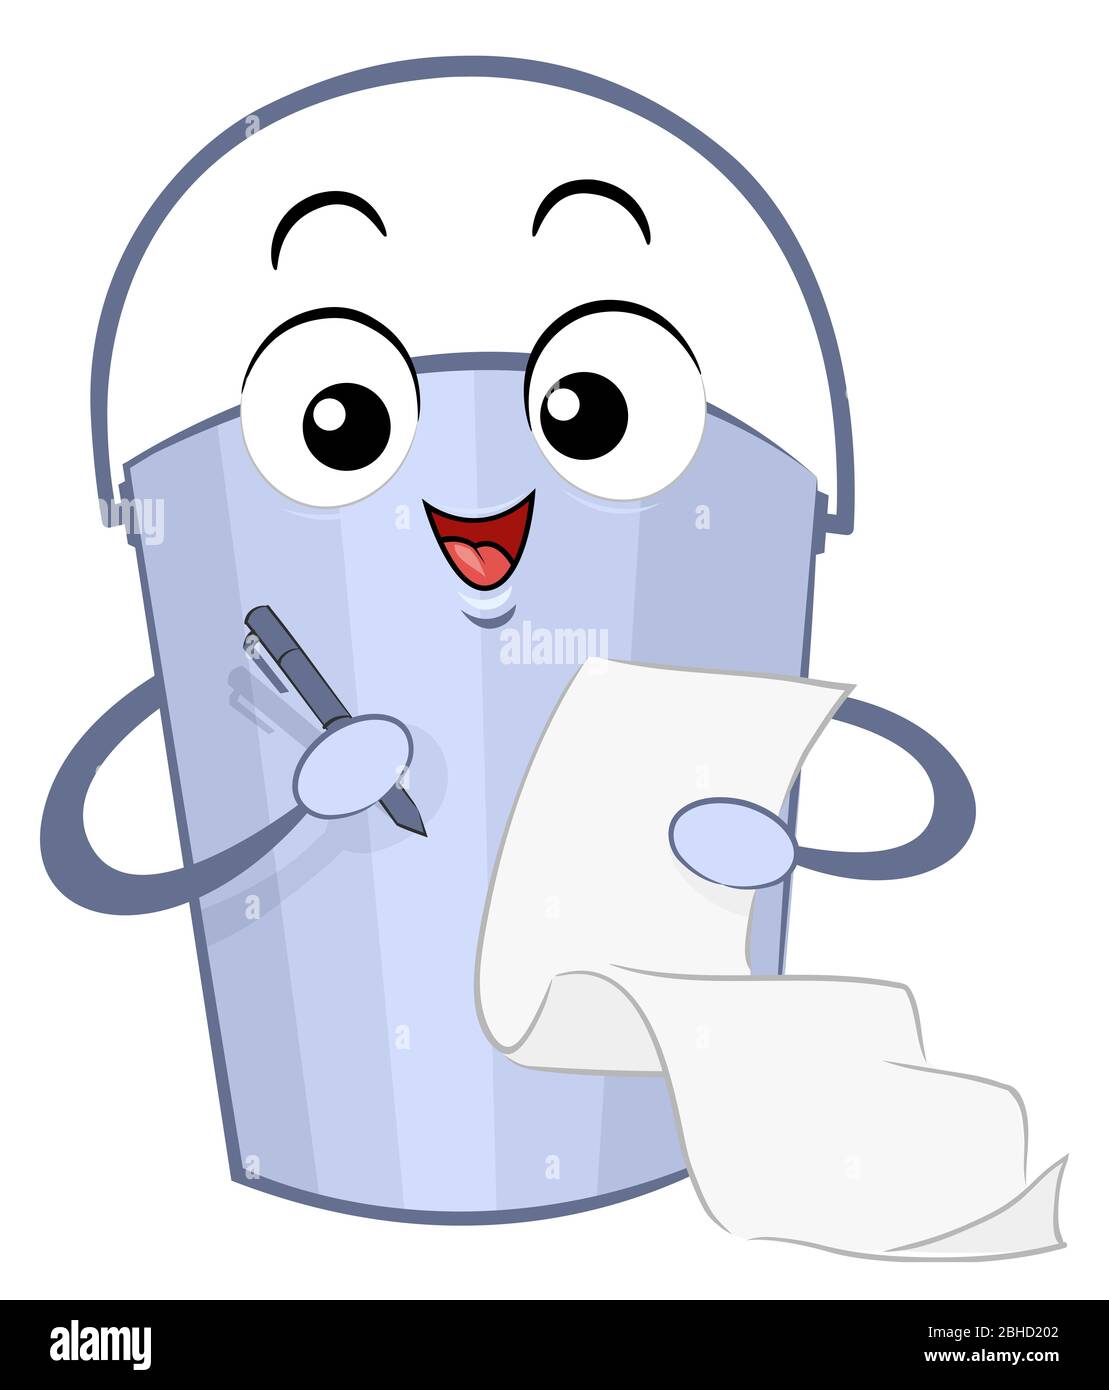 Illustration of a Bucket Mascot Holding a Pen and Paper for Bucket List Stock Photo